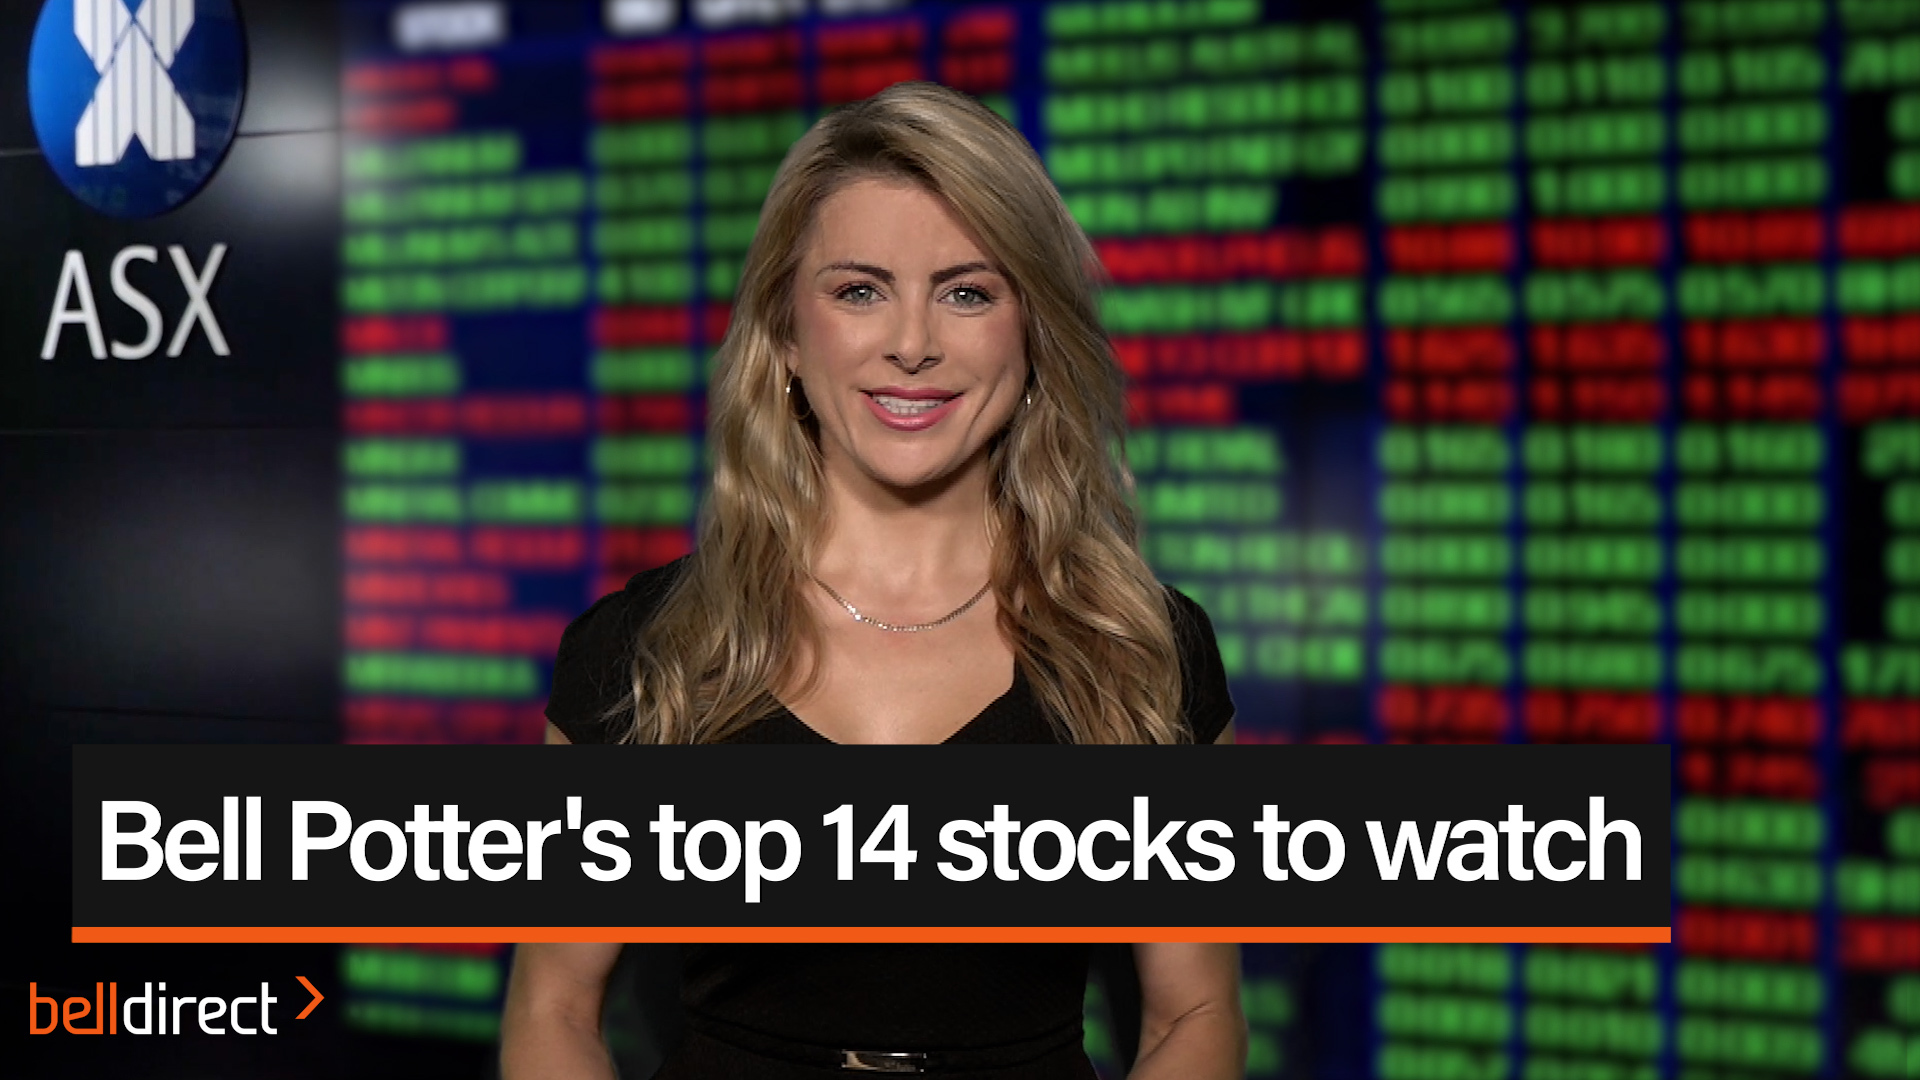 Bell Potter's top 14 stocks to watch